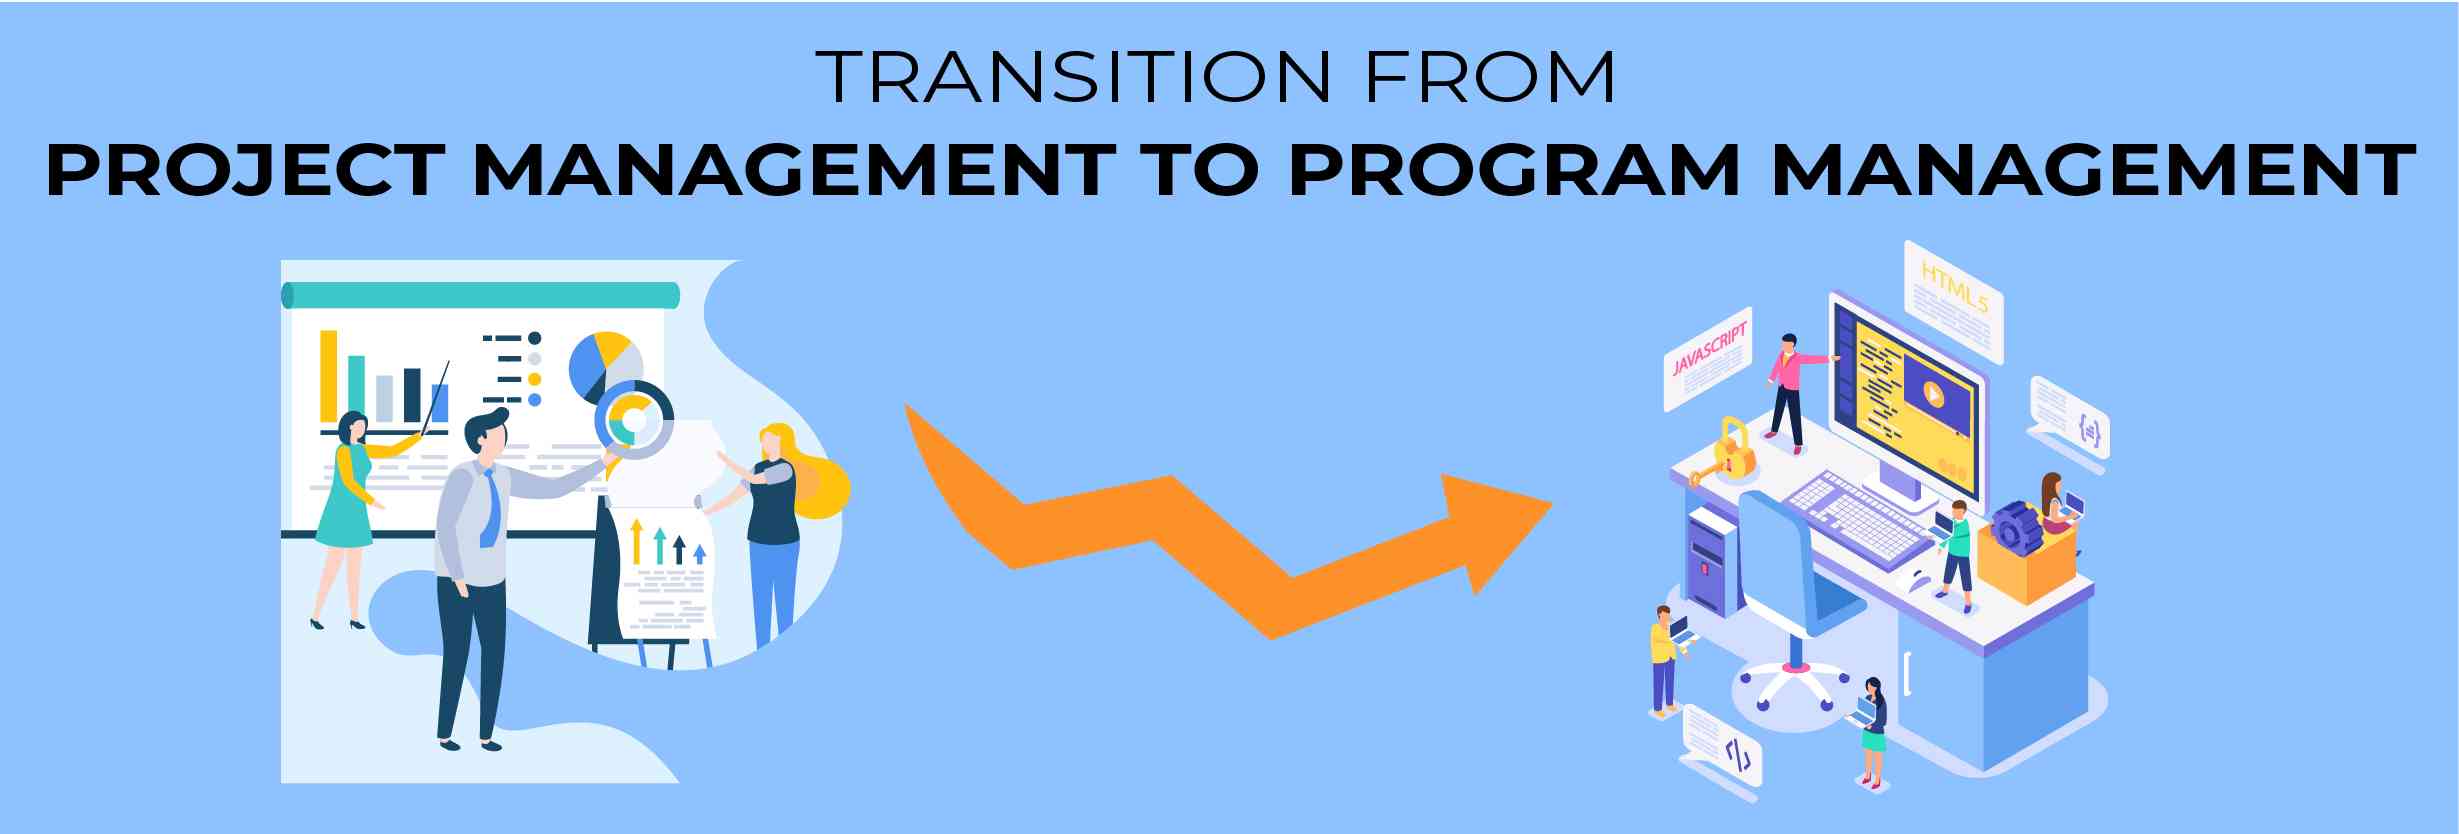 Transition from Project Management to Program Management